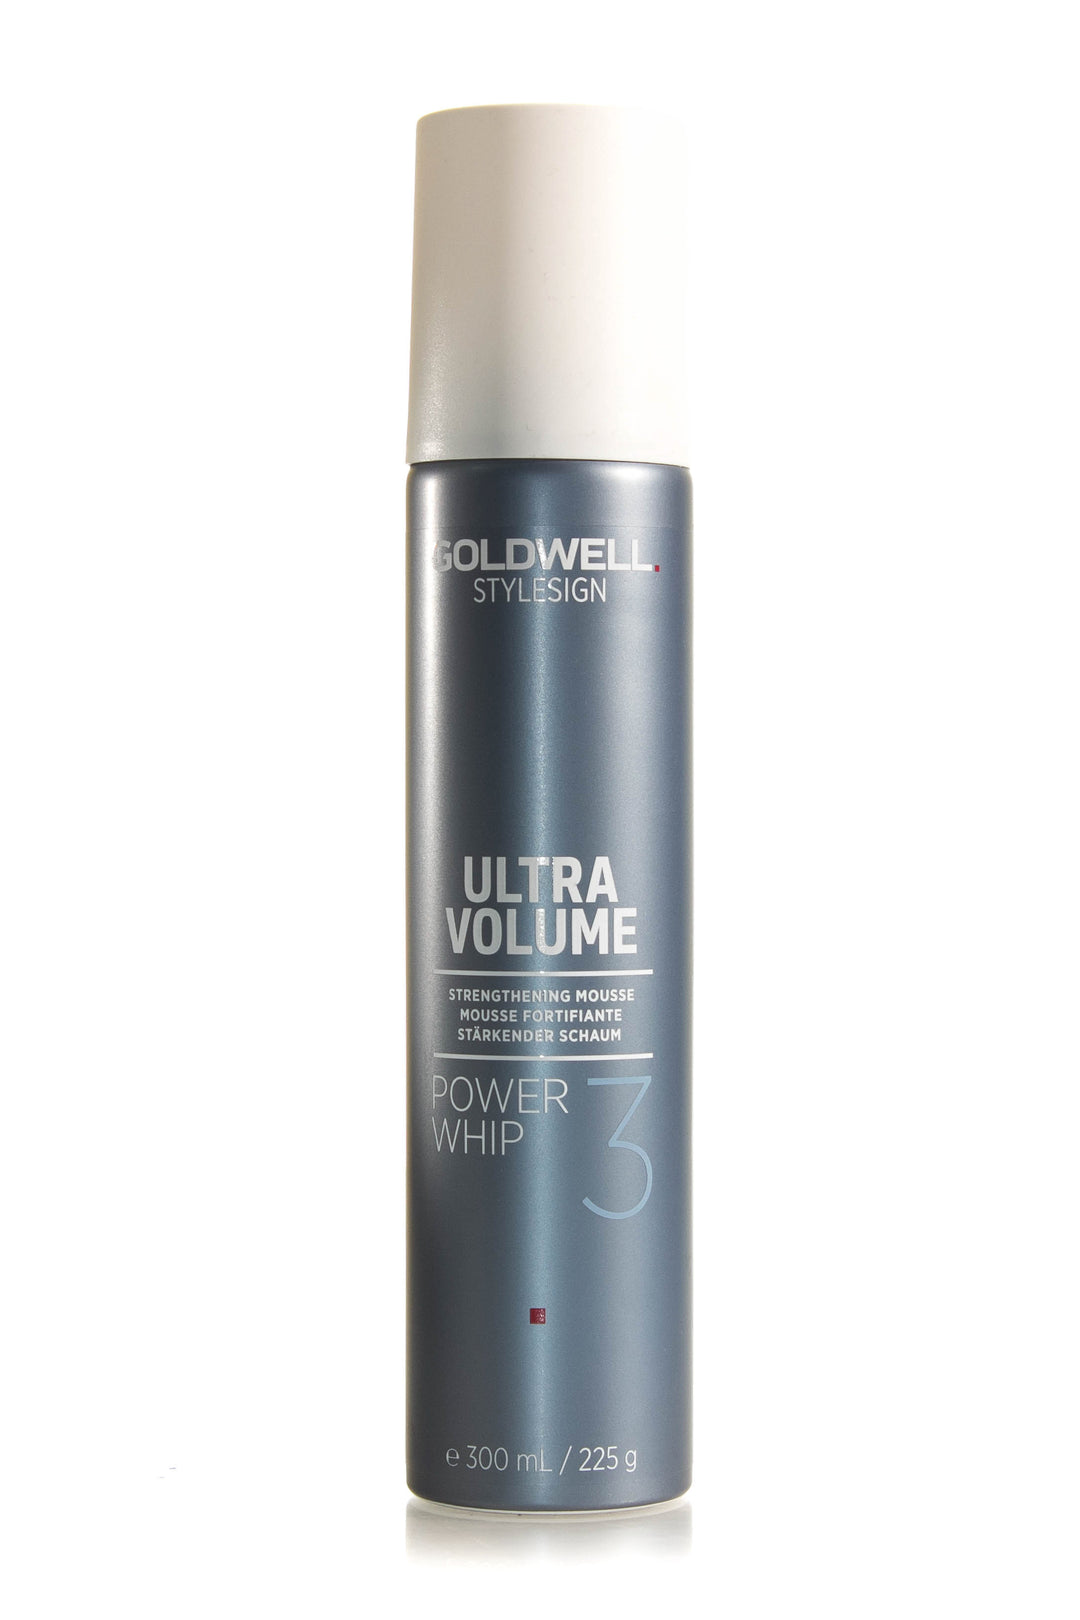 Product Image: Goldwell Power Whip - 300ml